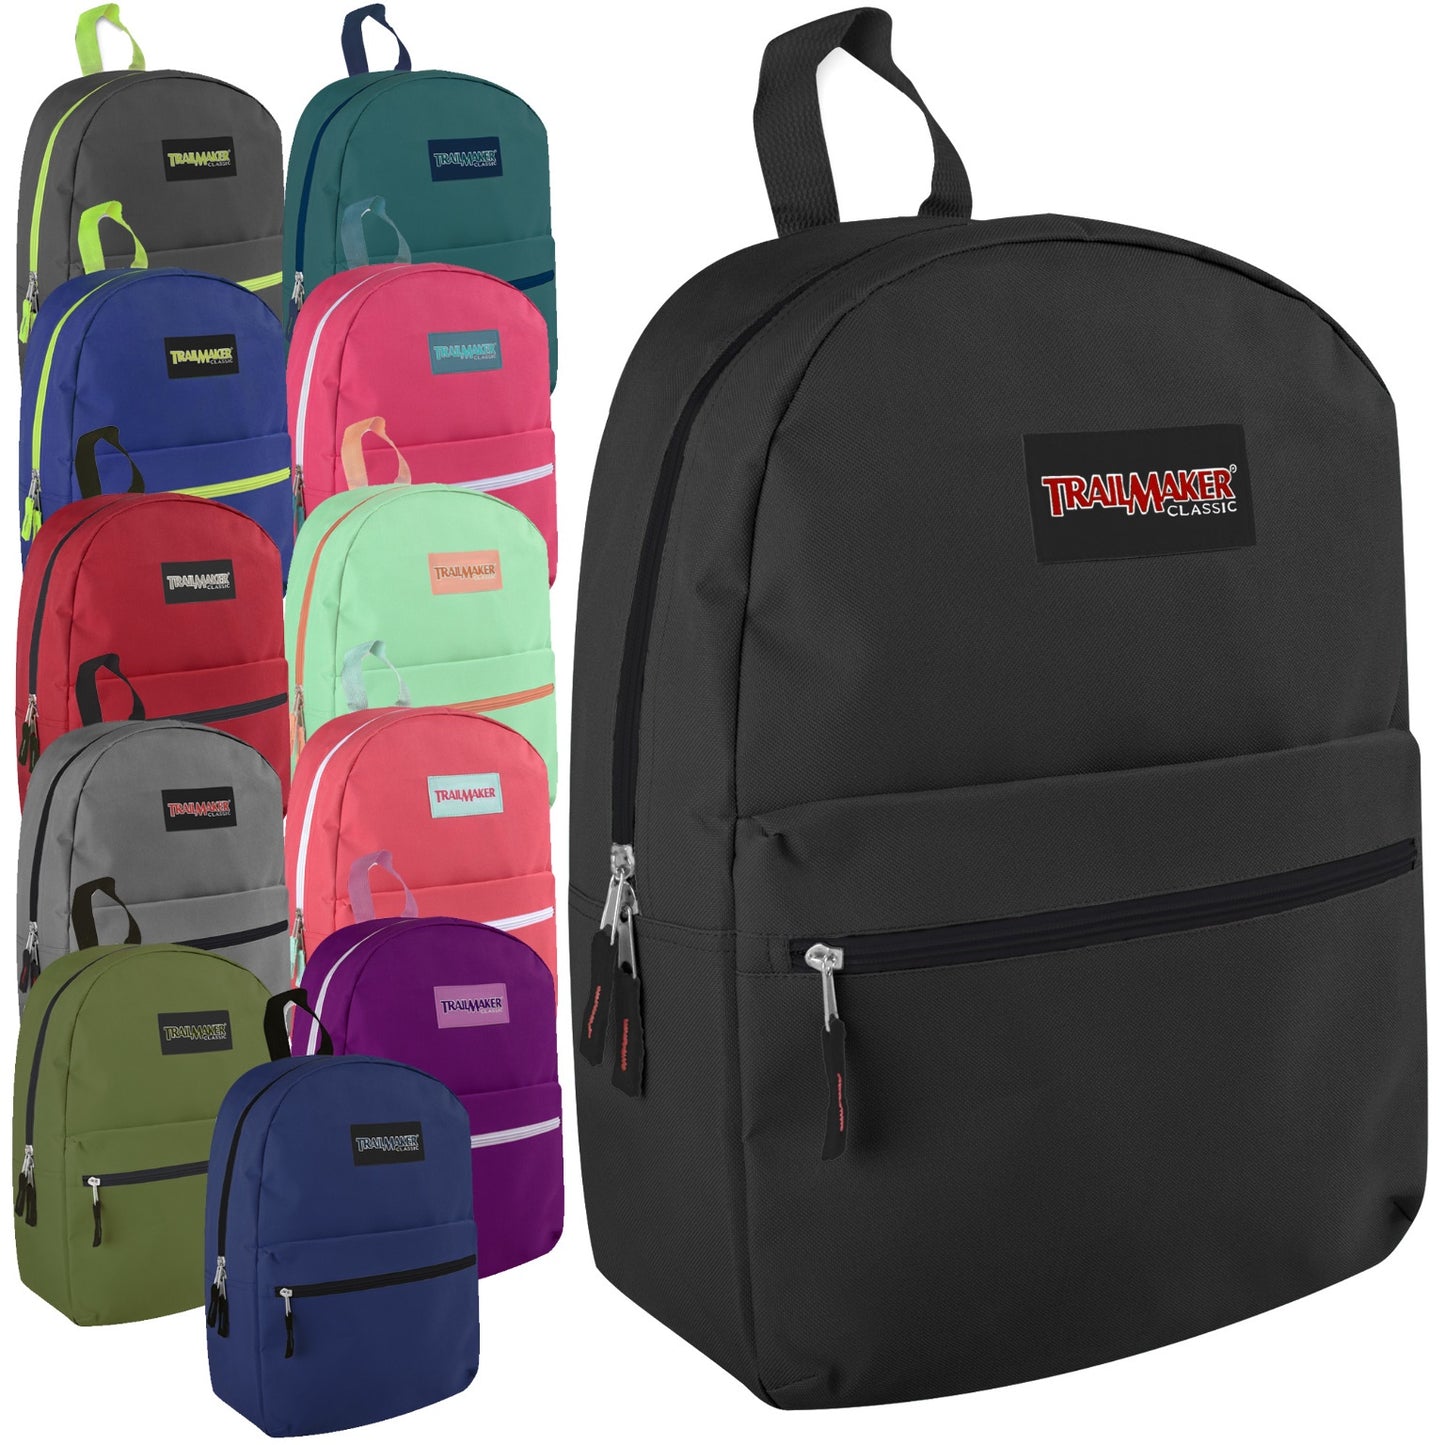 17" Basic Backpack, Size: 17"x 12" x 5.5", Single top zipper and one front zip pocket